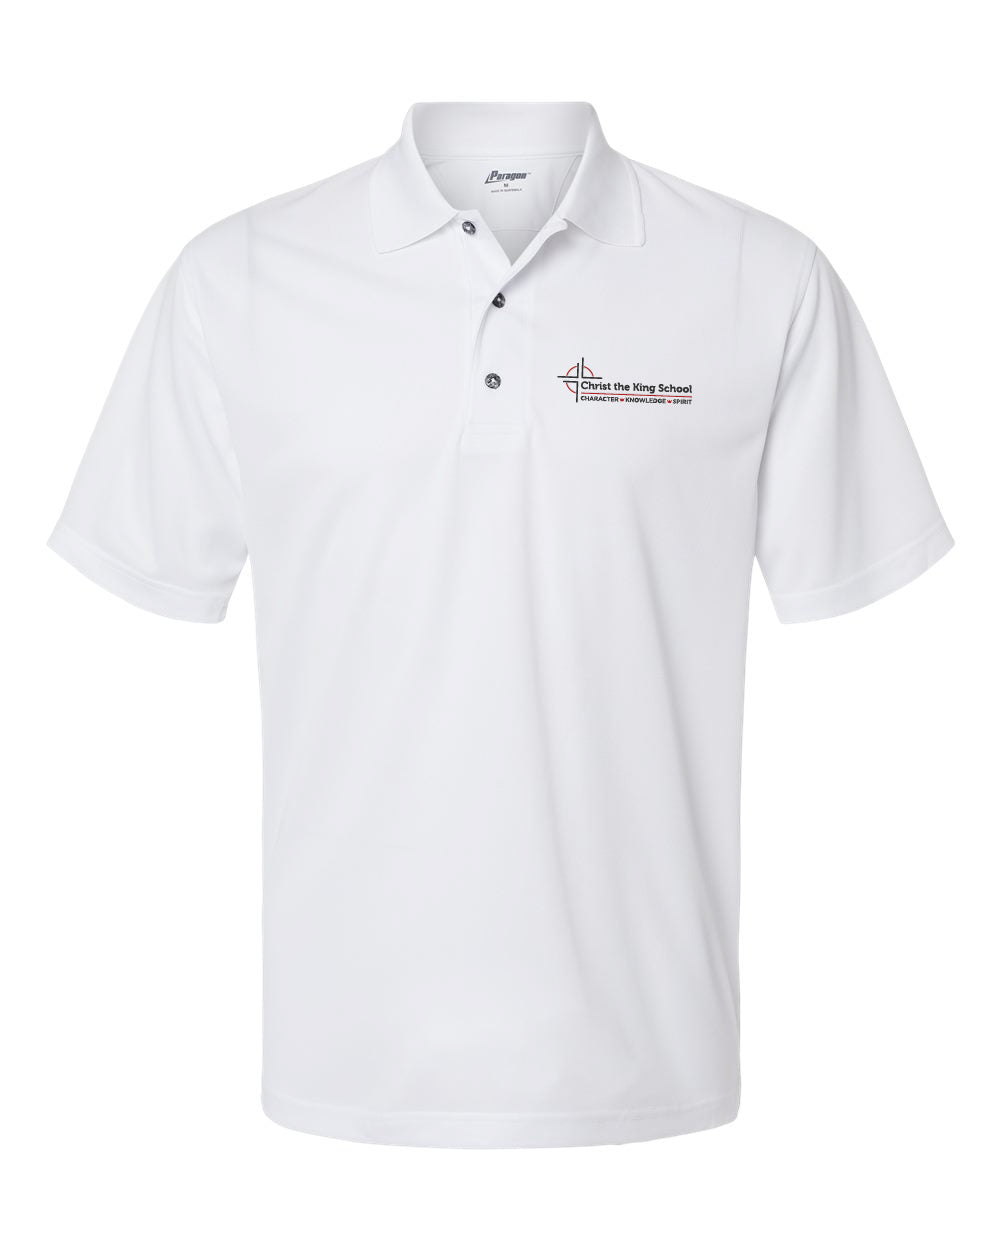 ADULT - Dry Fit Short Sleeve Polo White